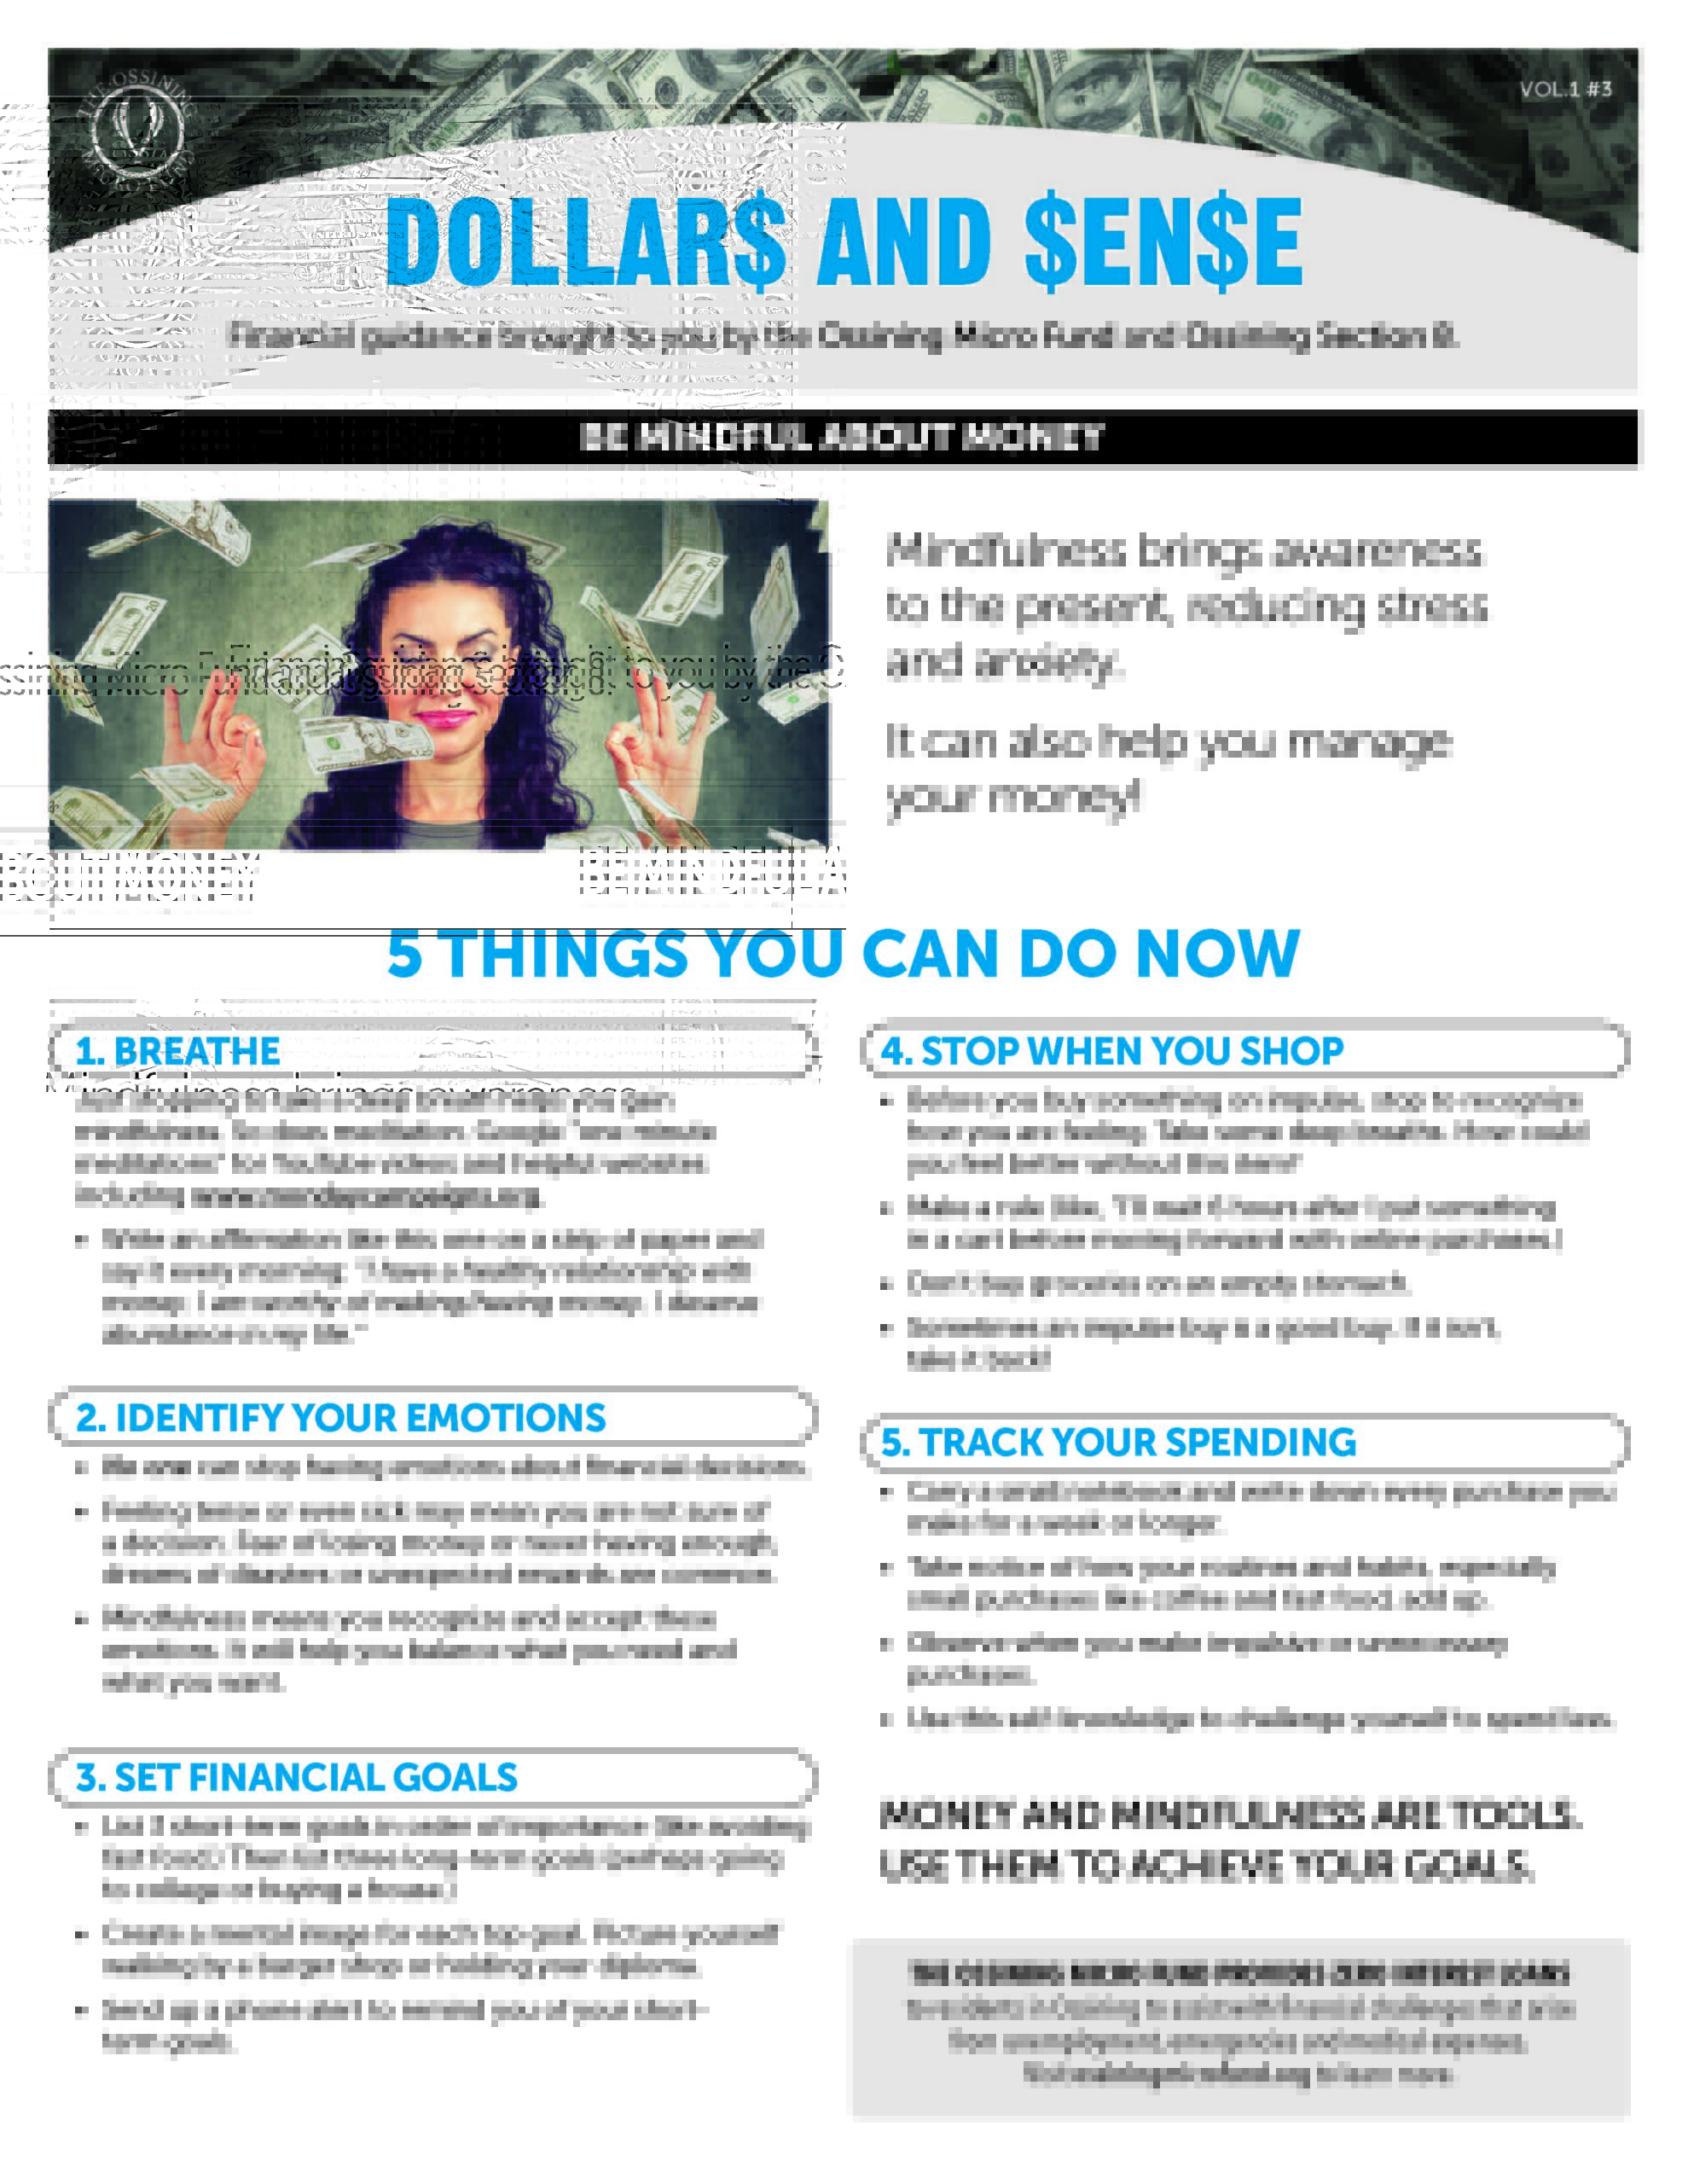 OMF Bulletin Vol. 1 Issue 3 on Mindful Spending_Page_1